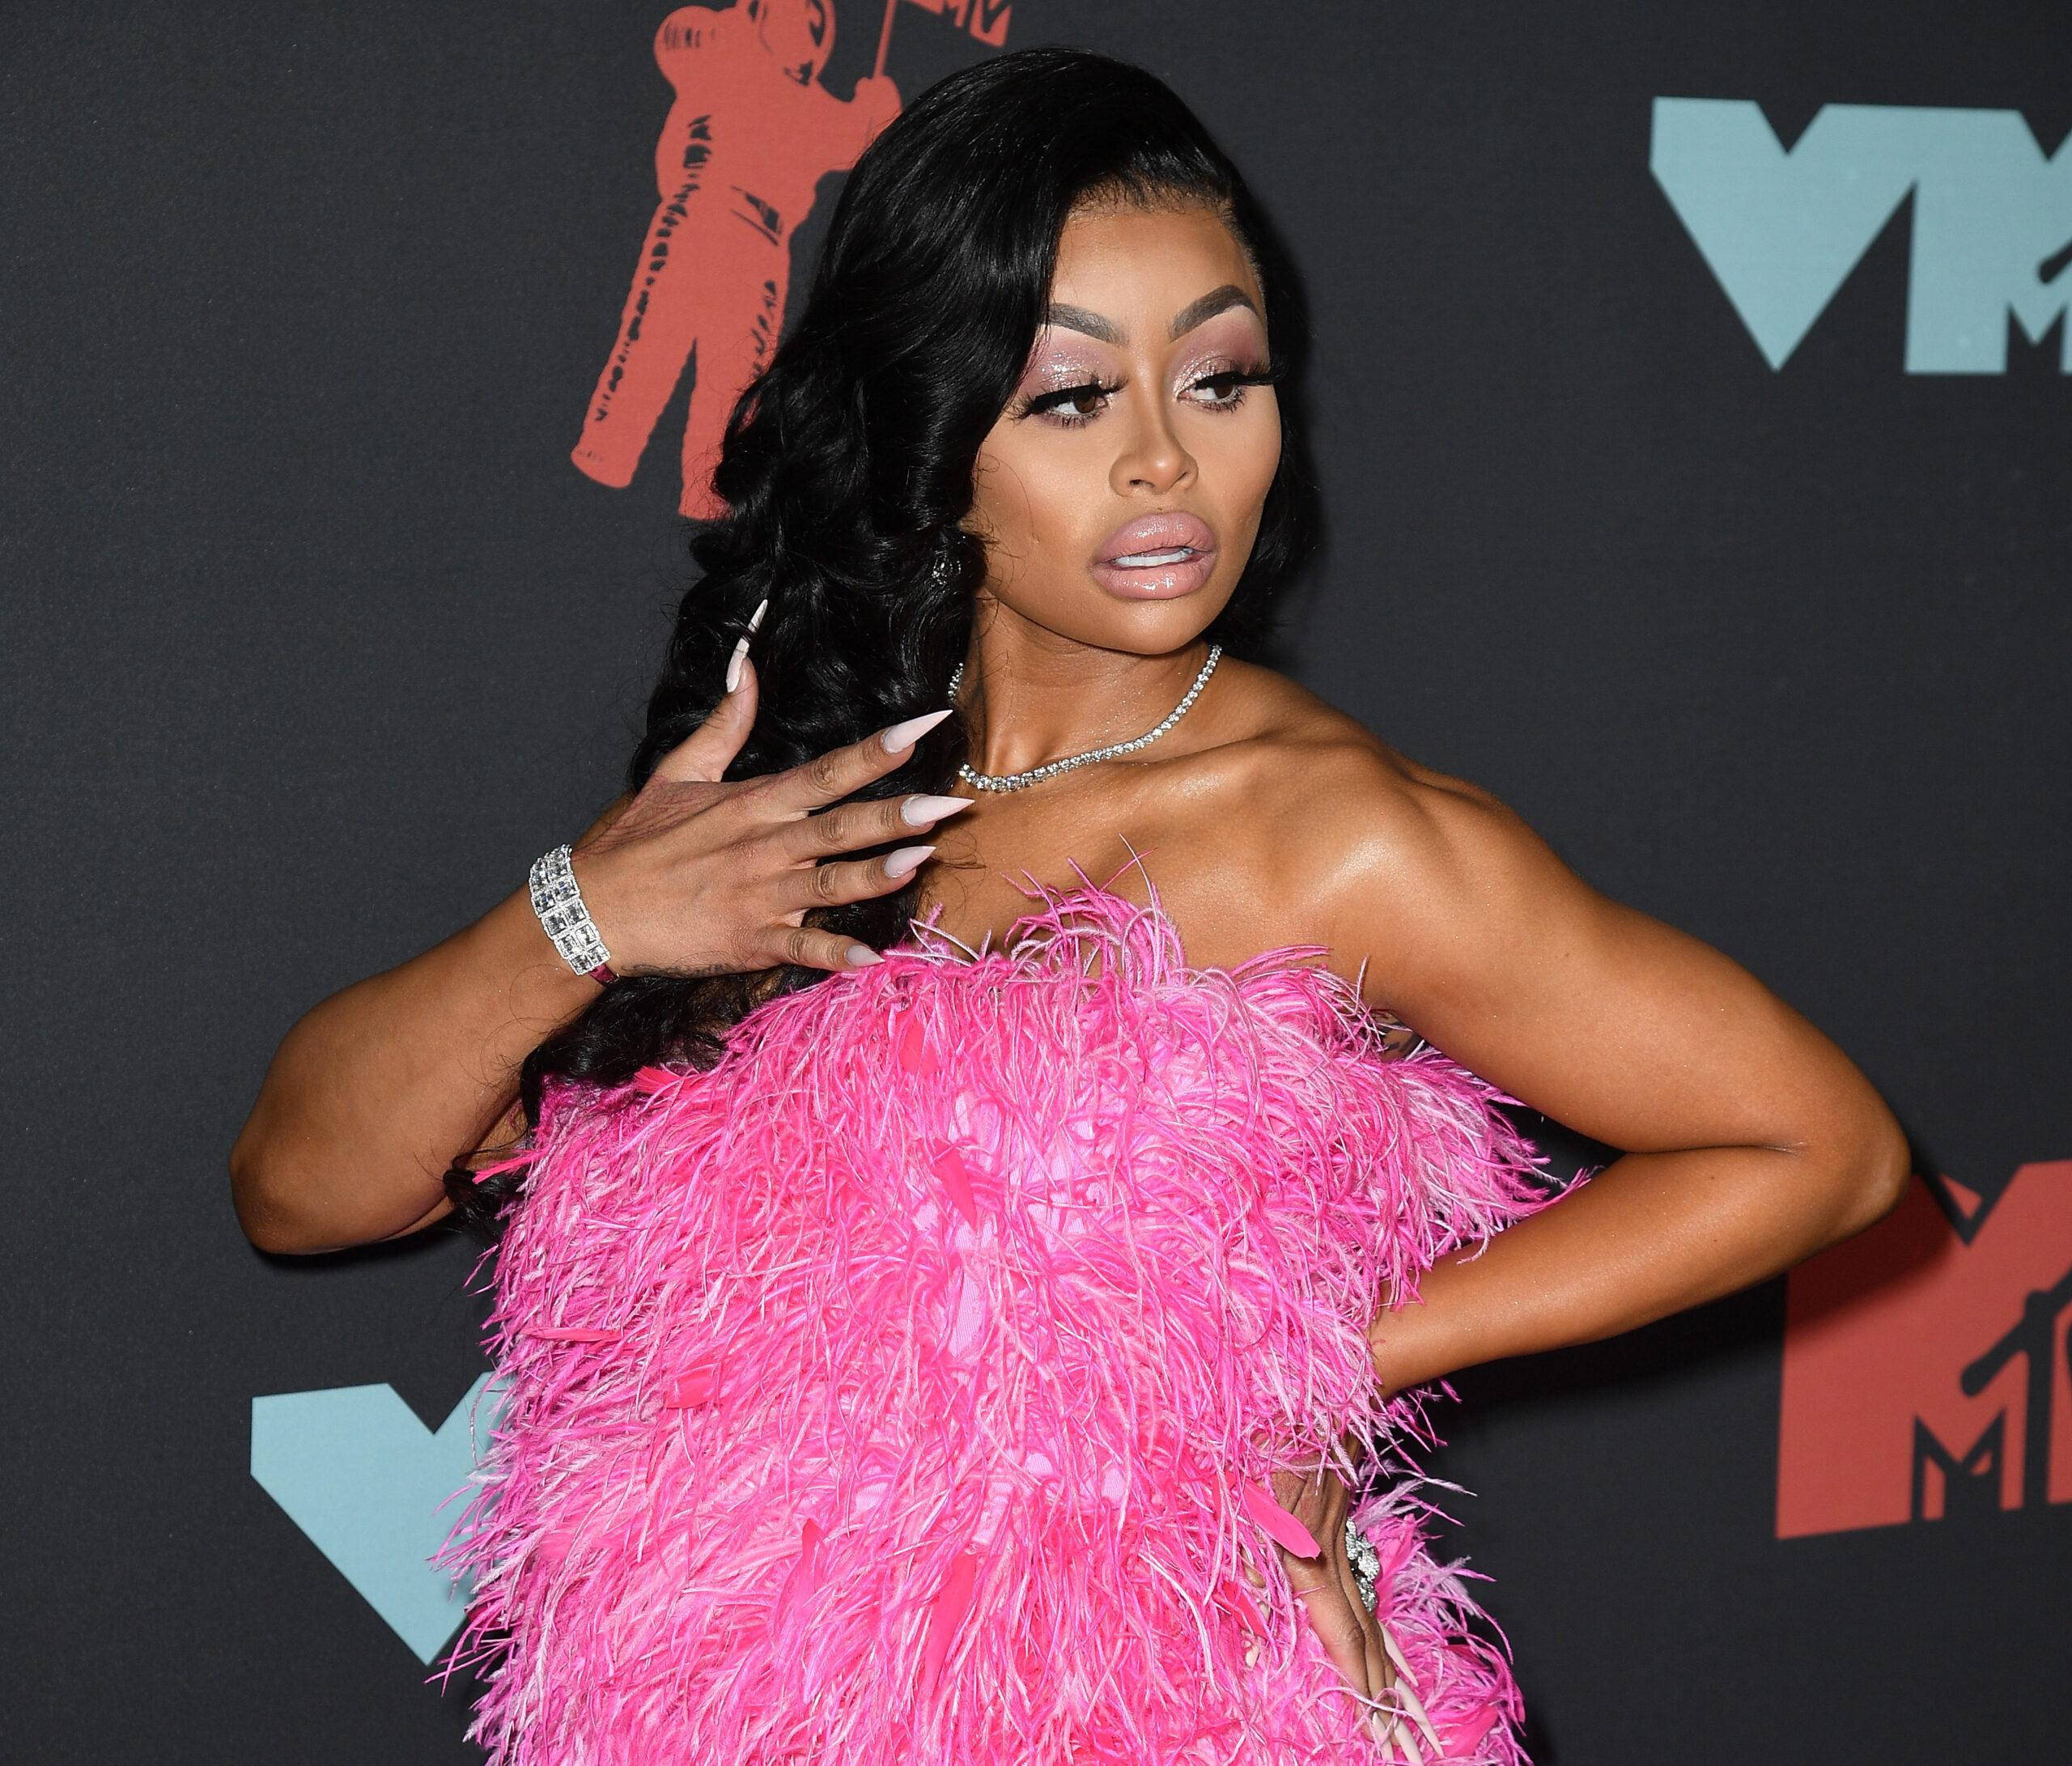 Blac Chyna at MTV Video Music Awards - Arrivals